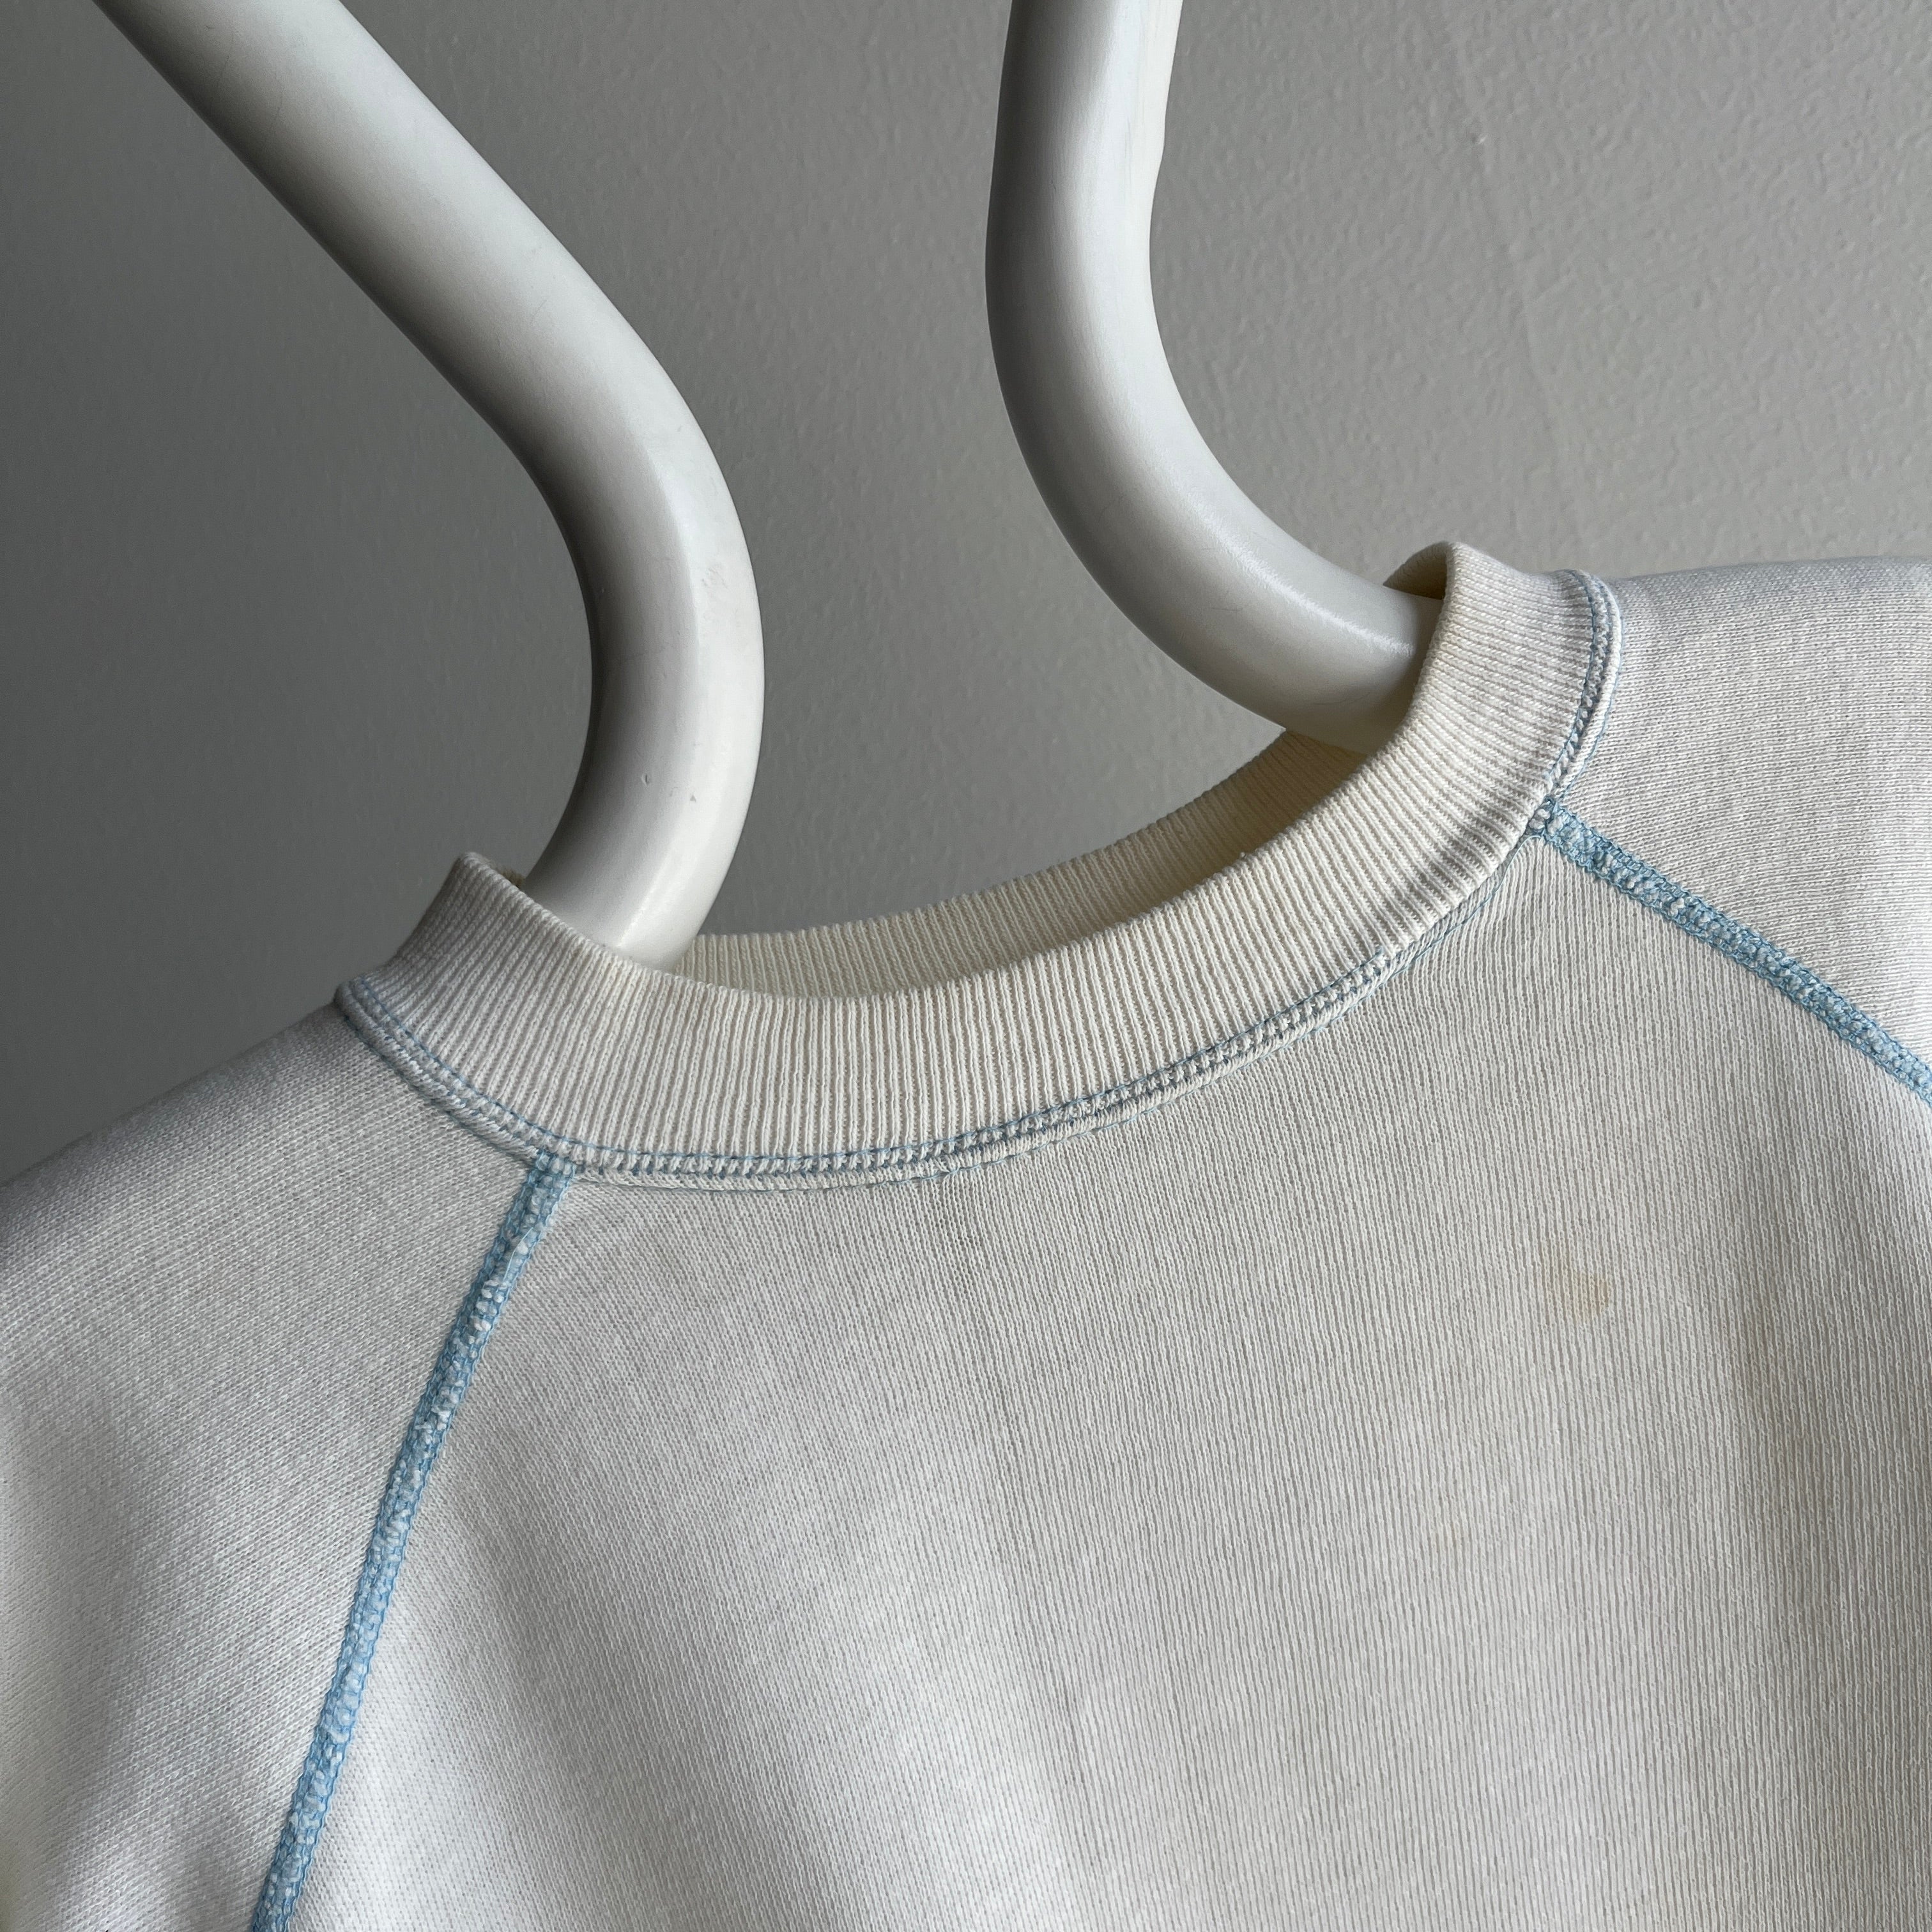 1970s Epic Bleached Out and Perfectly Worn Sweatshirt with Blue Contrast Stitching